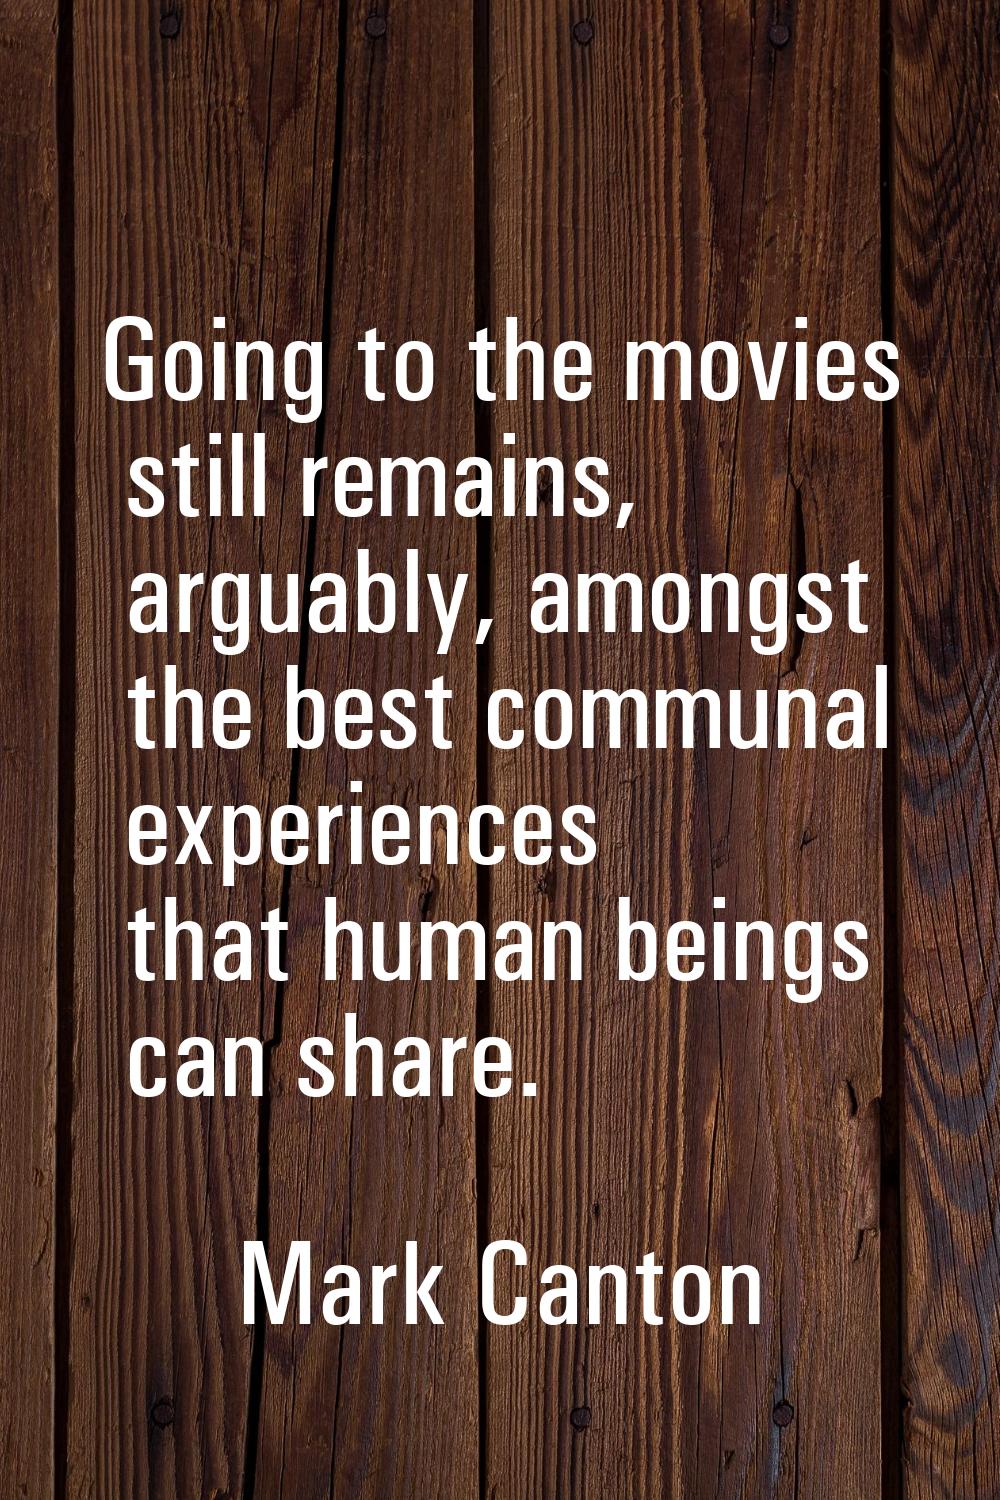 Going to the movies still remains, arguably, amongst the best communal experiences that human being